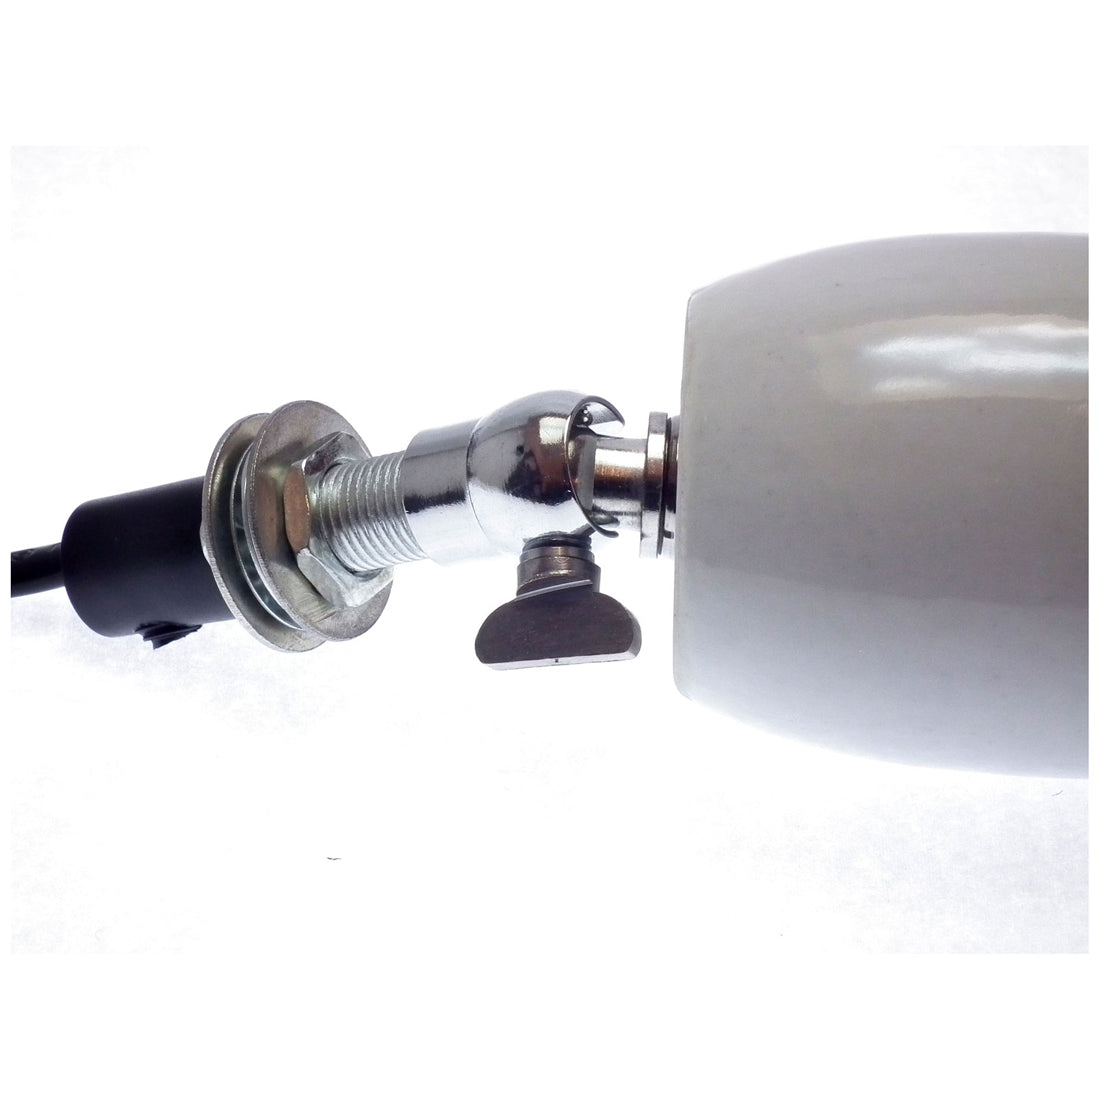 Ceramic Bulb Holder Adjustable Screw E27 200W with Switch 1.8m Cable